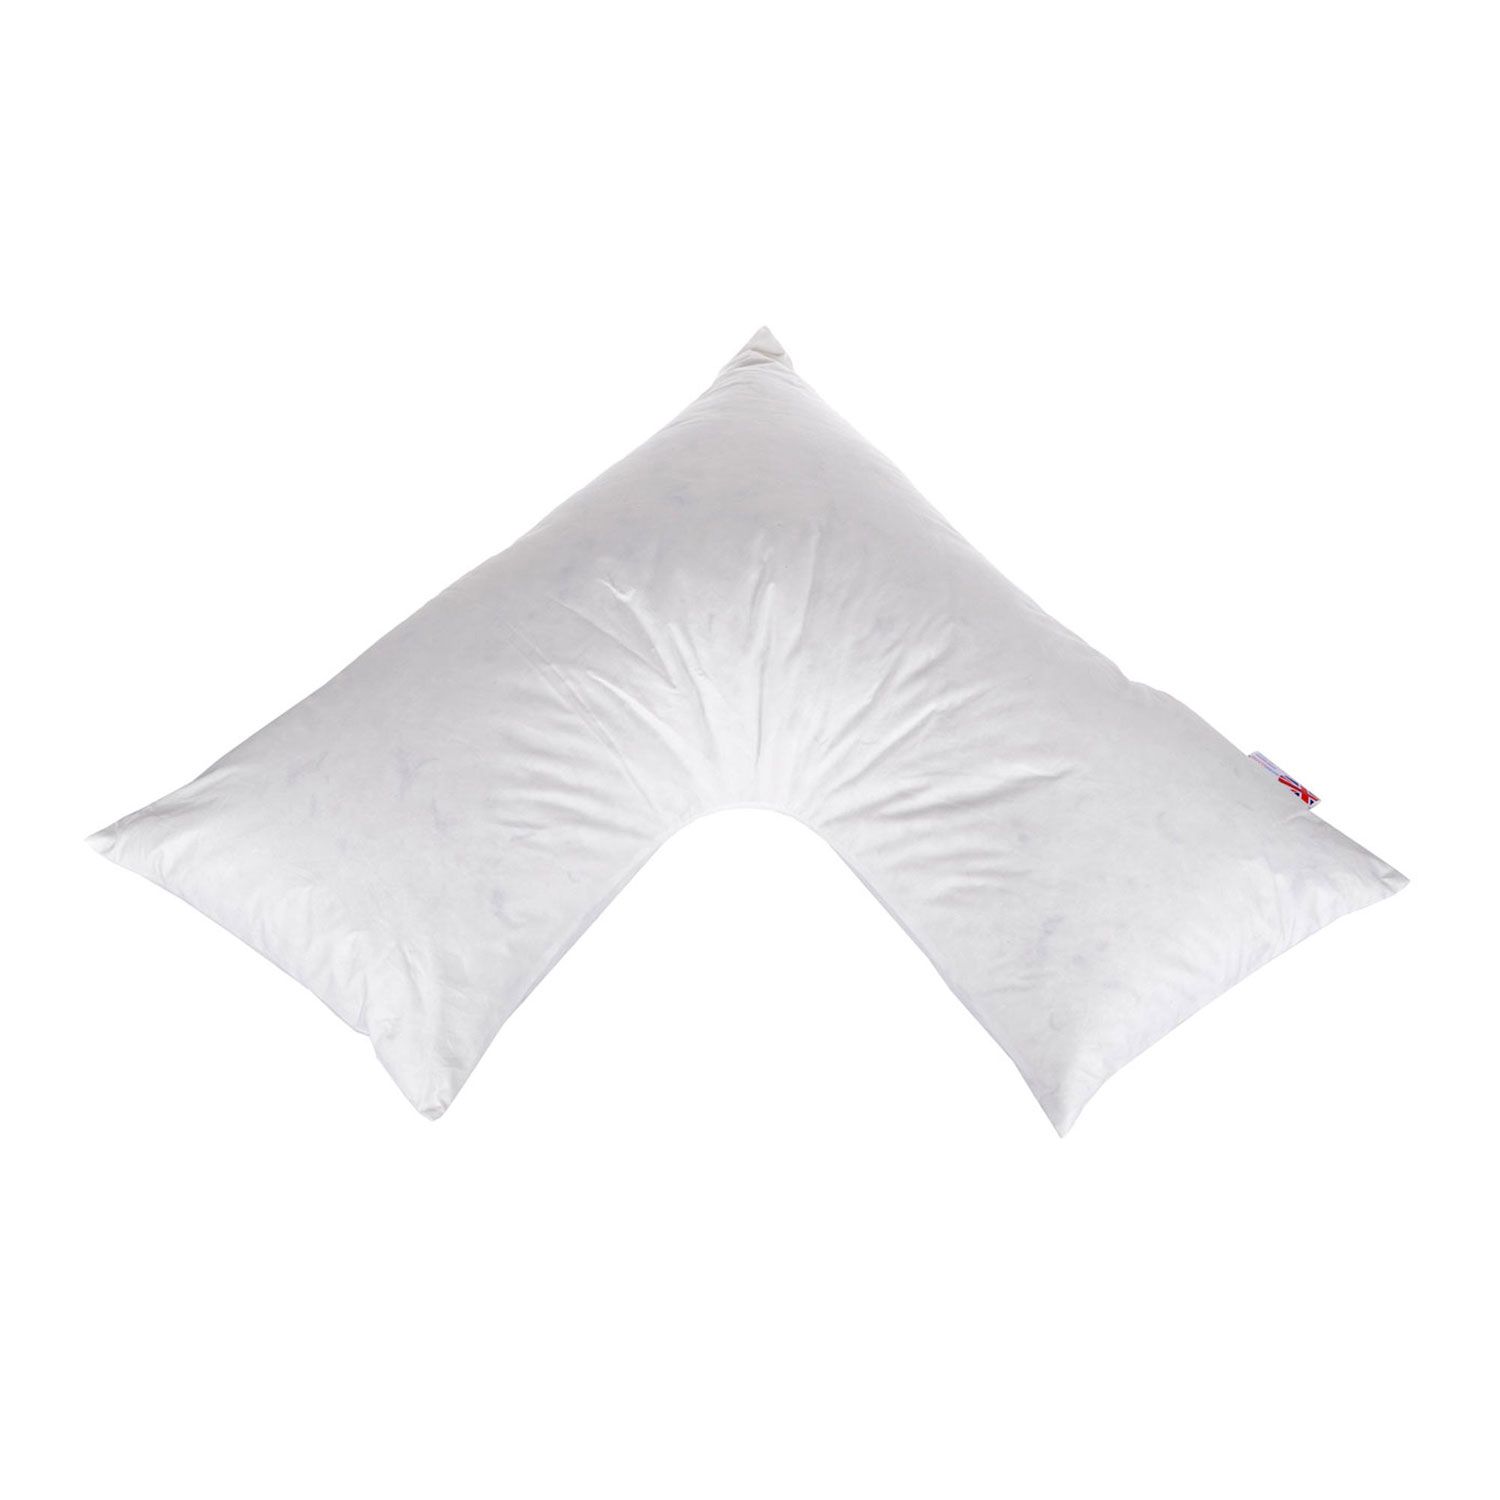 DUCK FEATHER & DOWN  VSHAPED PILLOW ORTHOPEDIC MATERNITY PREGNANCY NURSING BABY 